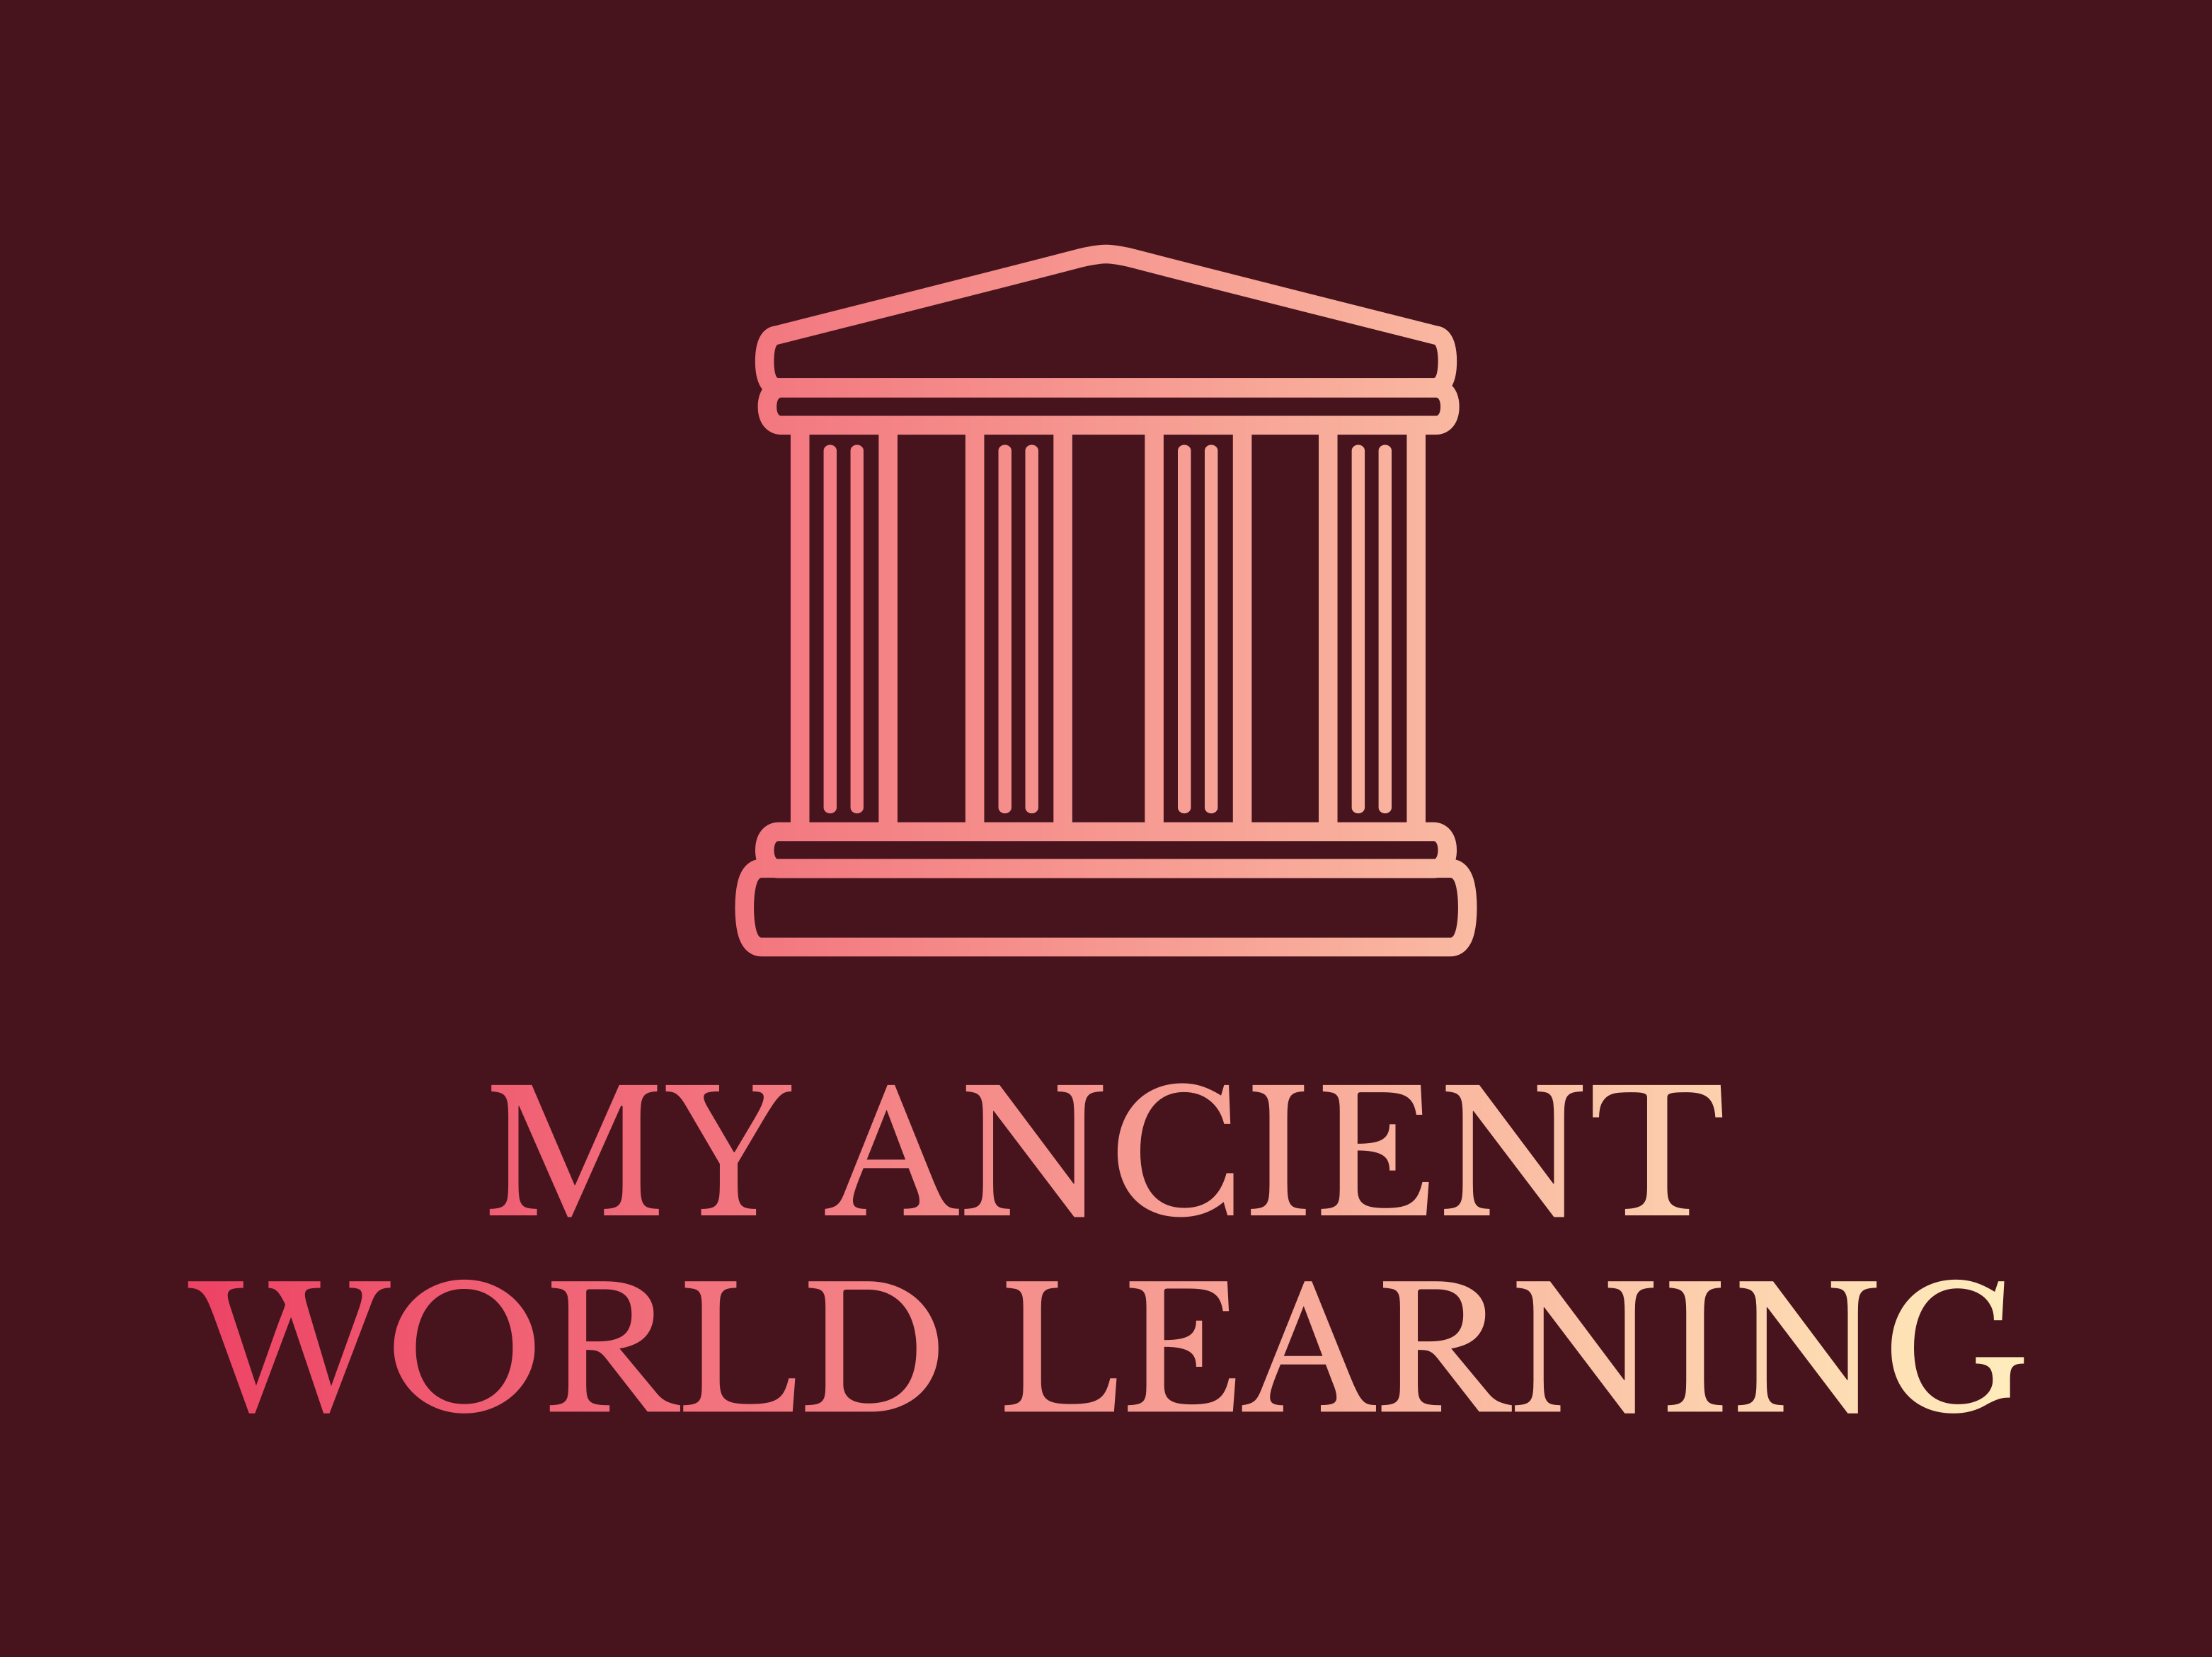 My Ancient World Learning